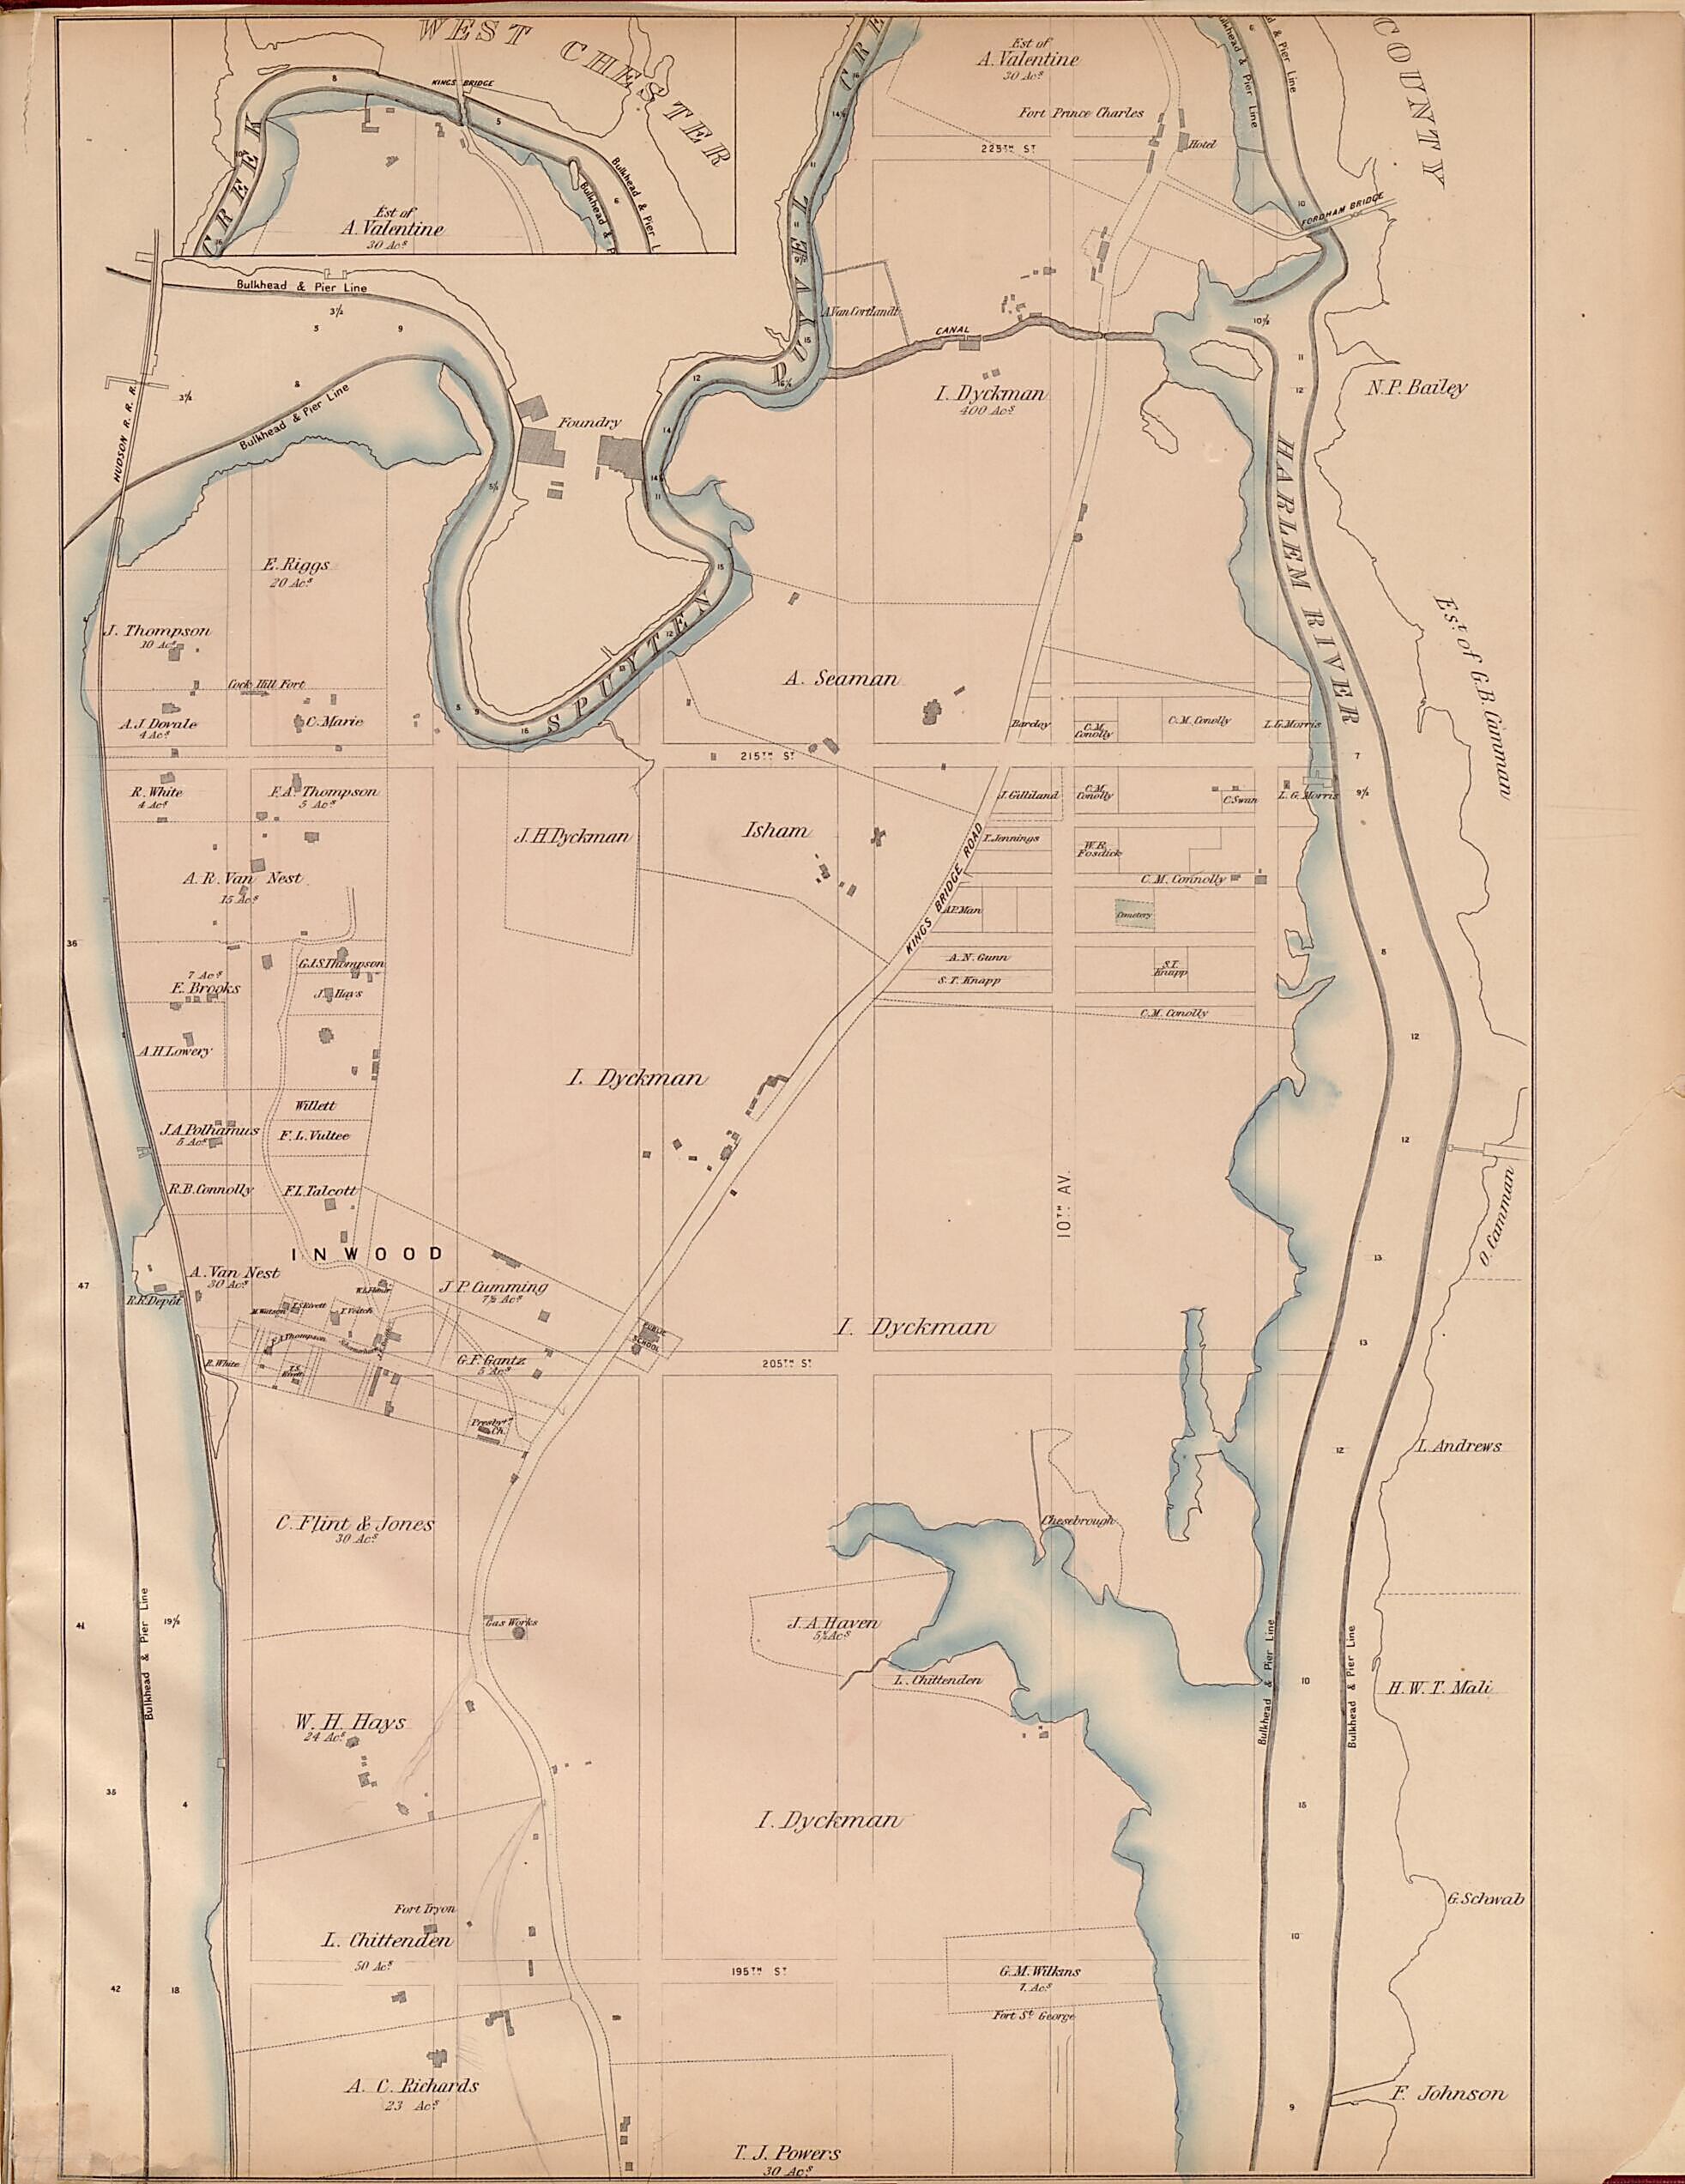 This old map of Plate 19 from Plan of New York City from the Battery to Spuyten Duyvil Creek from 1866 was created by John F. Harrison in 1866